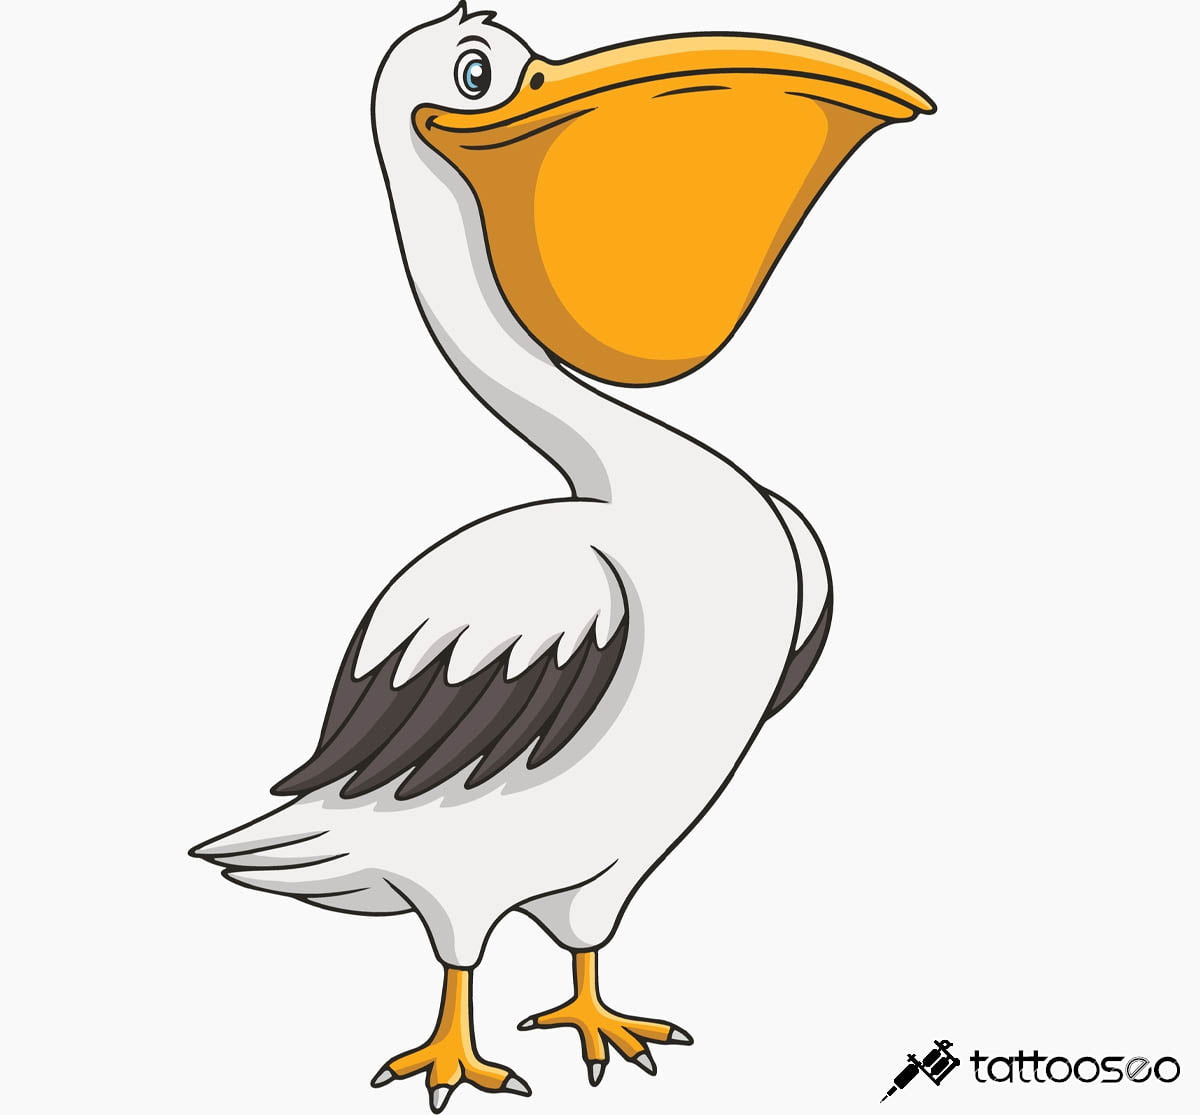 Pelican tattoo meaning